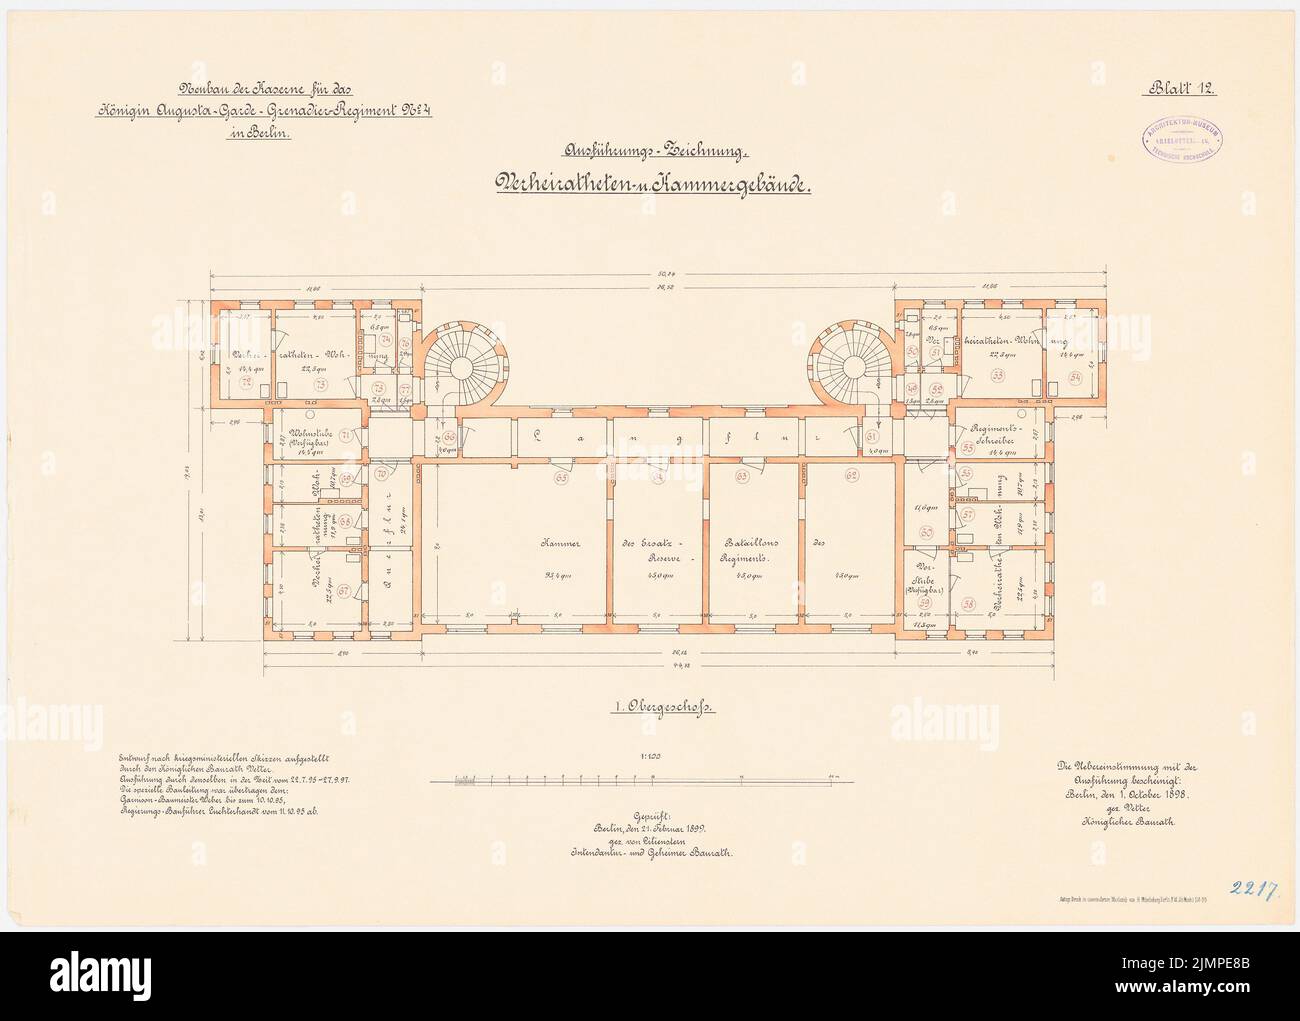 Vetter, barracks of the Guard Cuerassier Regiment and the Queen-Augusta Grenadier Regiment No. 4, Berlin (1895-1897): Guard-Cürassier-Regiment, married chamber building: floor plan 1: 100. Lithograph colored on the box, 52.1 x 72.6 cm (including scan edges) Vetter : Kaserne des Garde-Kürassier-Regiments und des Königin-Augusta-Garde-Grenadier-Regiments Nr. 4, Berlin Stock Photo